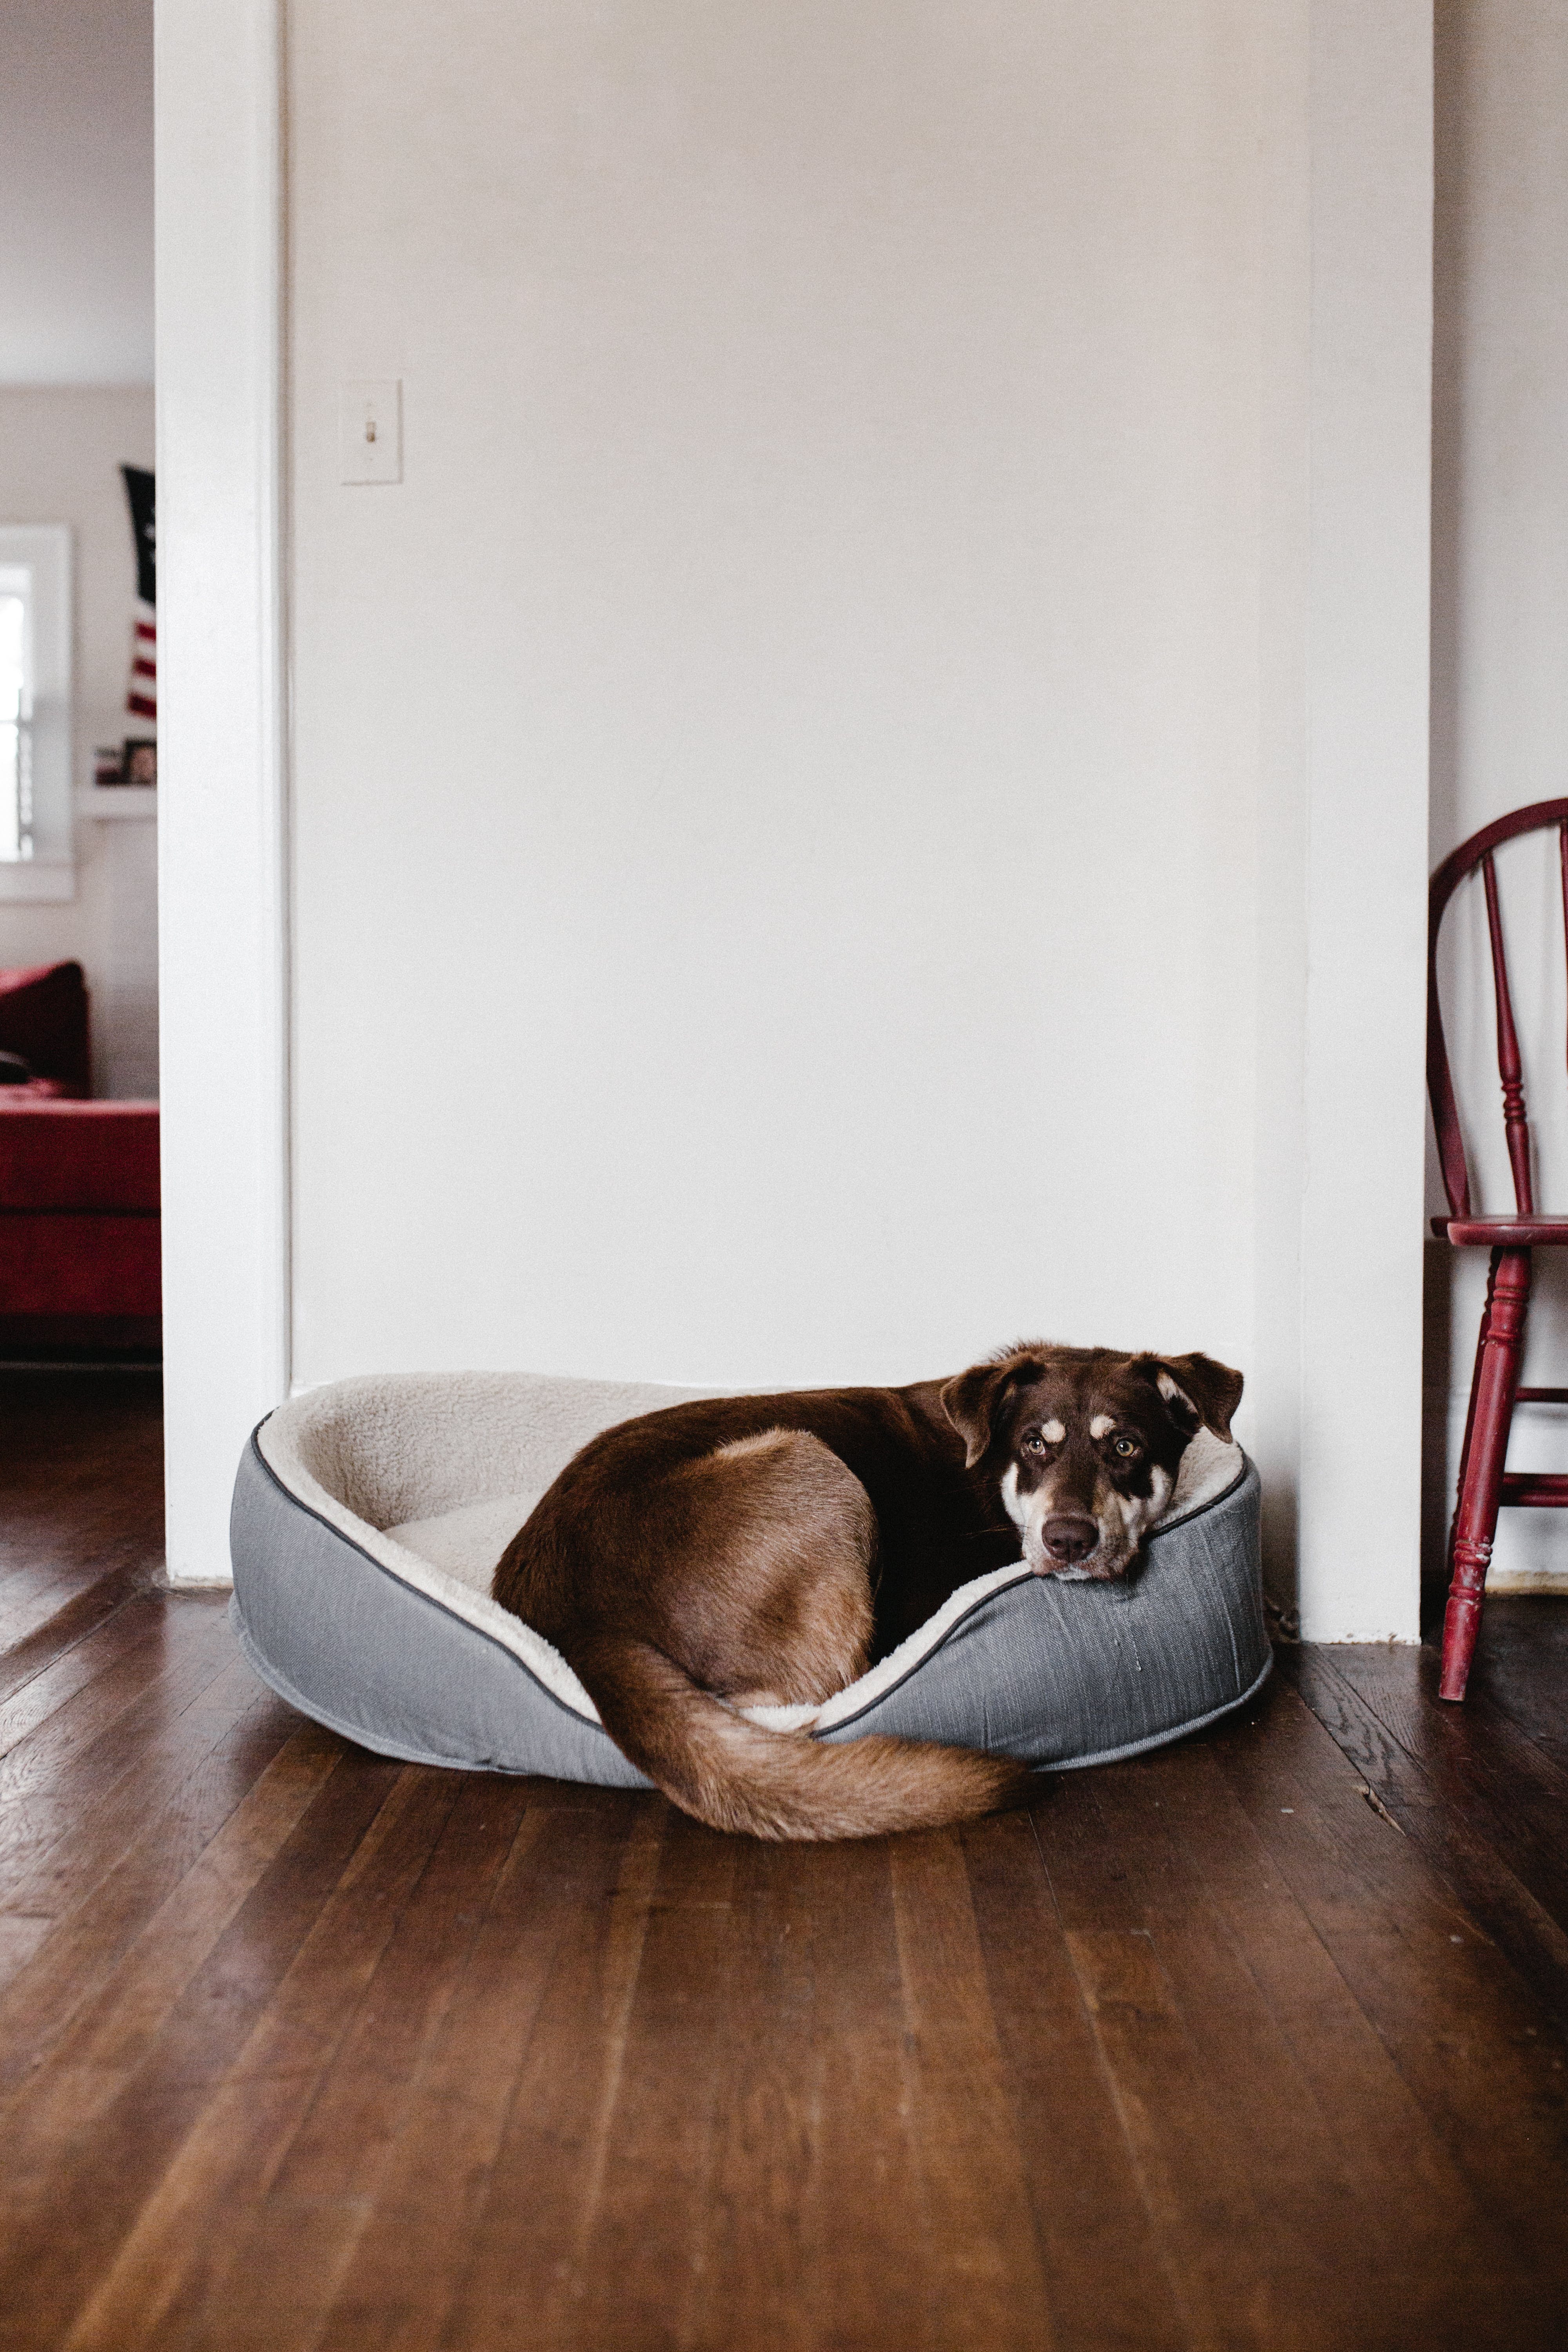 A dog resting in a pet bed. | Source: Pexels